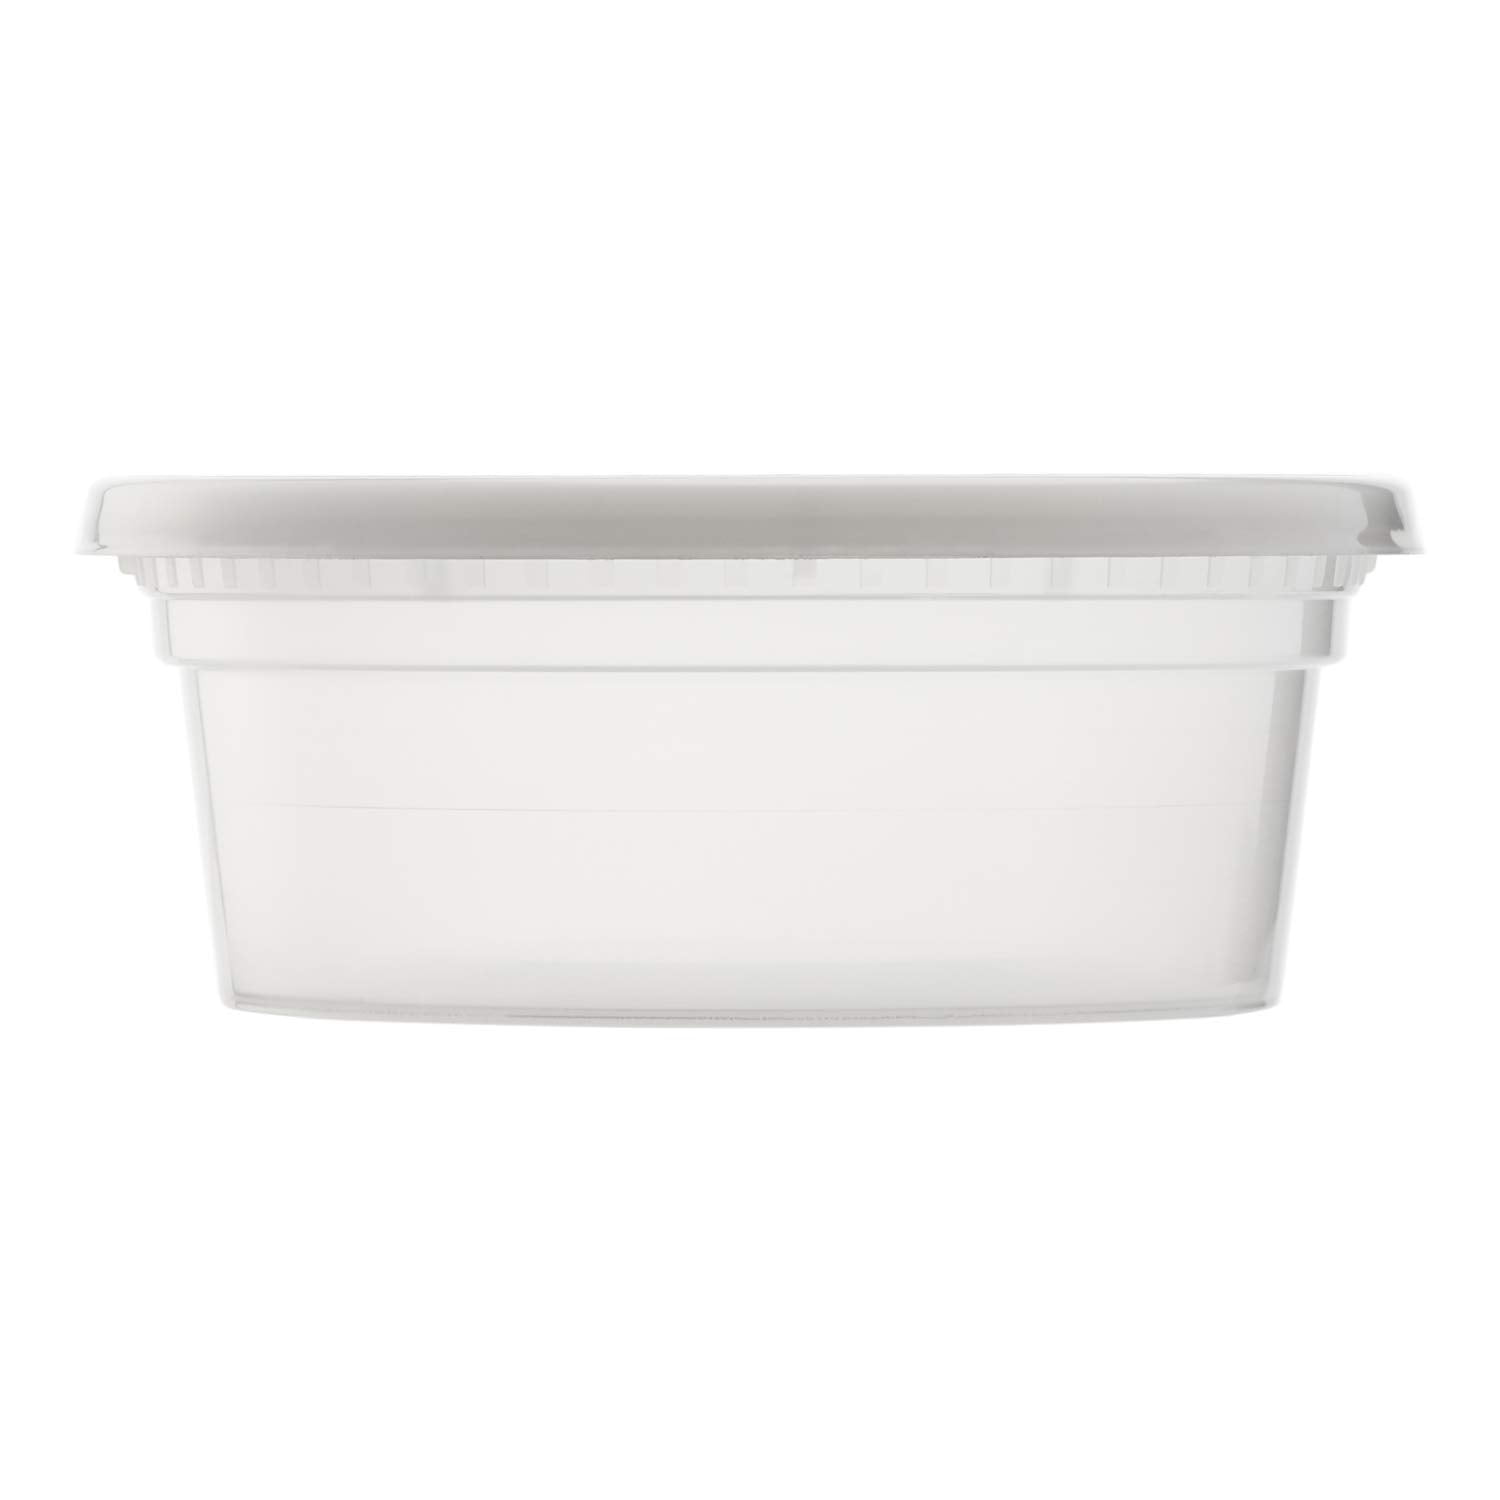 Heavy-Duty Deli Containers with Lids - 12 oz - ULINE - Carton of 240 - S-22769